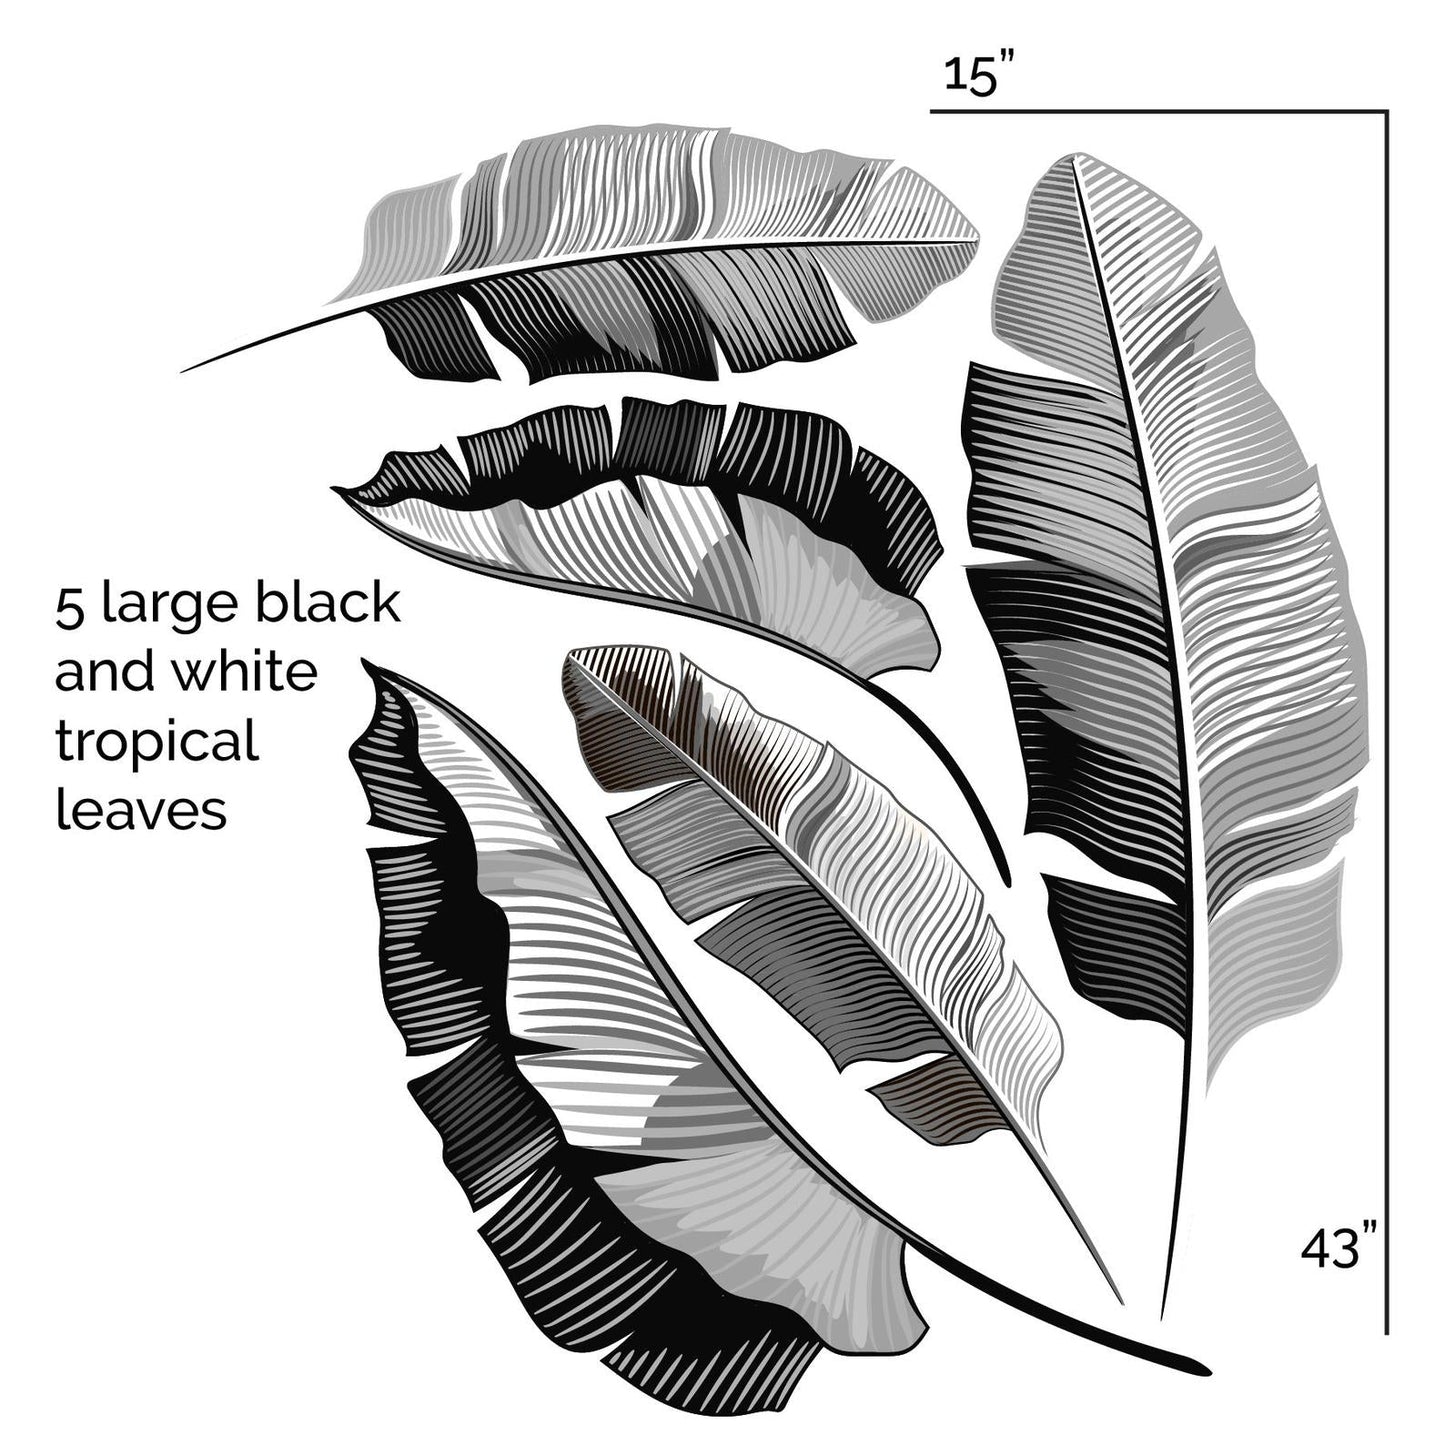 Black and White Banana Leaves Peel and Stick Wall Decals - Picture Perfect Decals